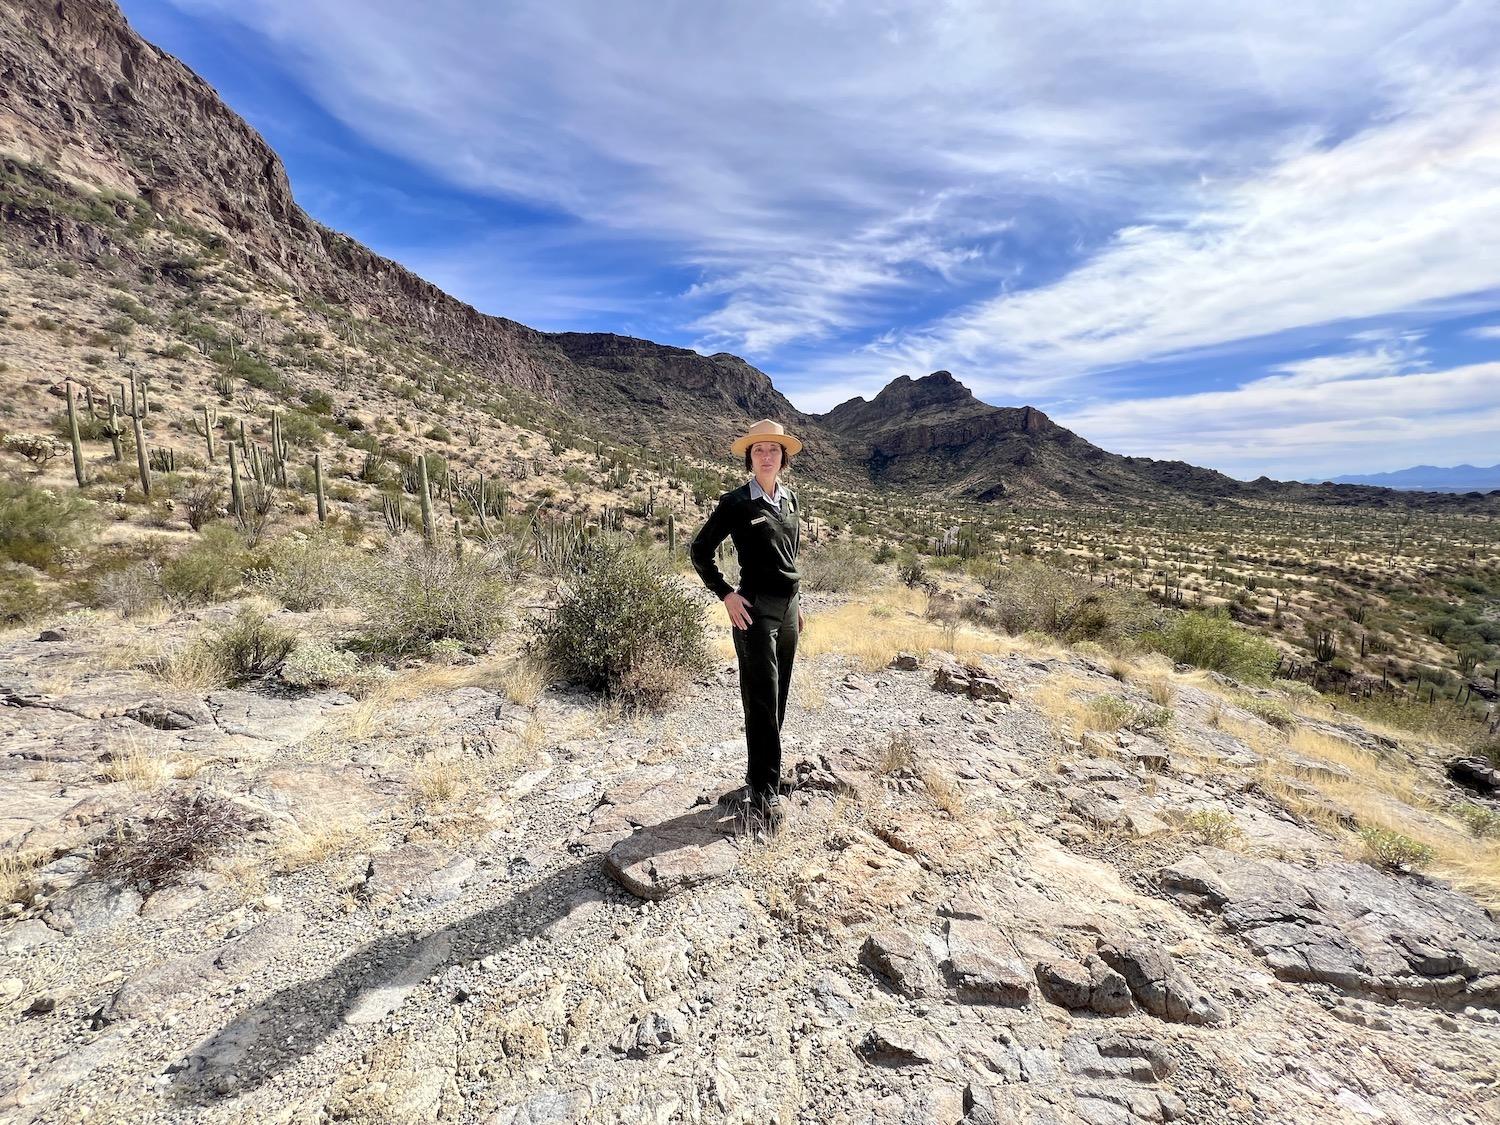 Organ Pipe Cactus National Monument ranger Cate Blanch stands at a popular picnic spot along Ajo Mountain Drive in the &quot;green desert&quot; of southwestern Arizona.